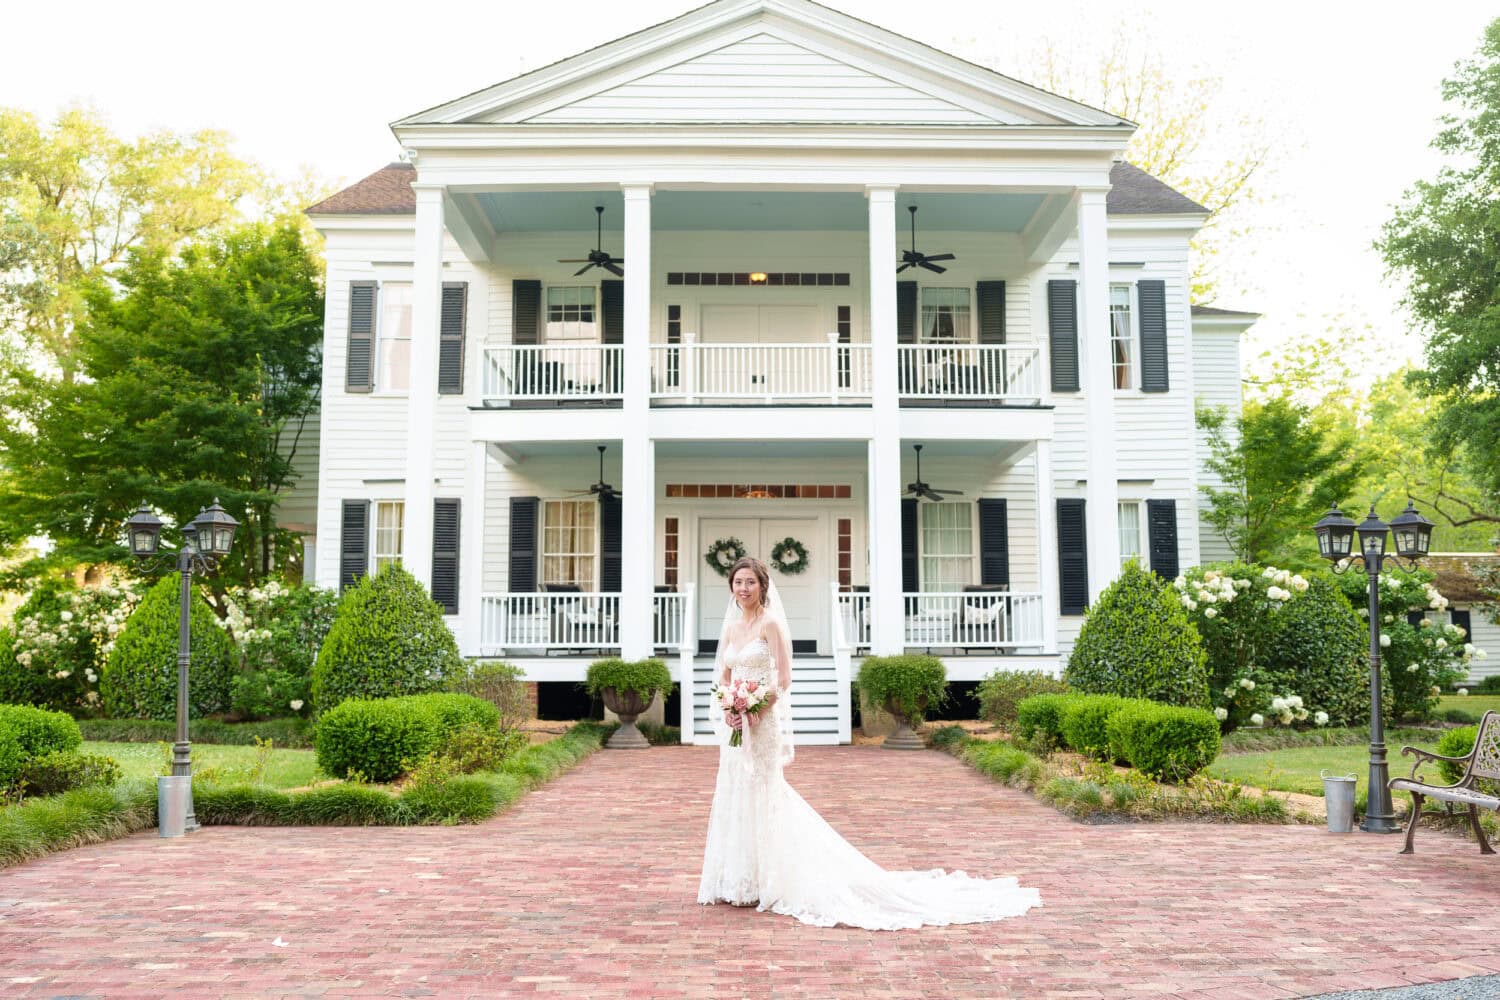 Portraits of bride and groom in front of the plantation house - Tanglewood Plantation